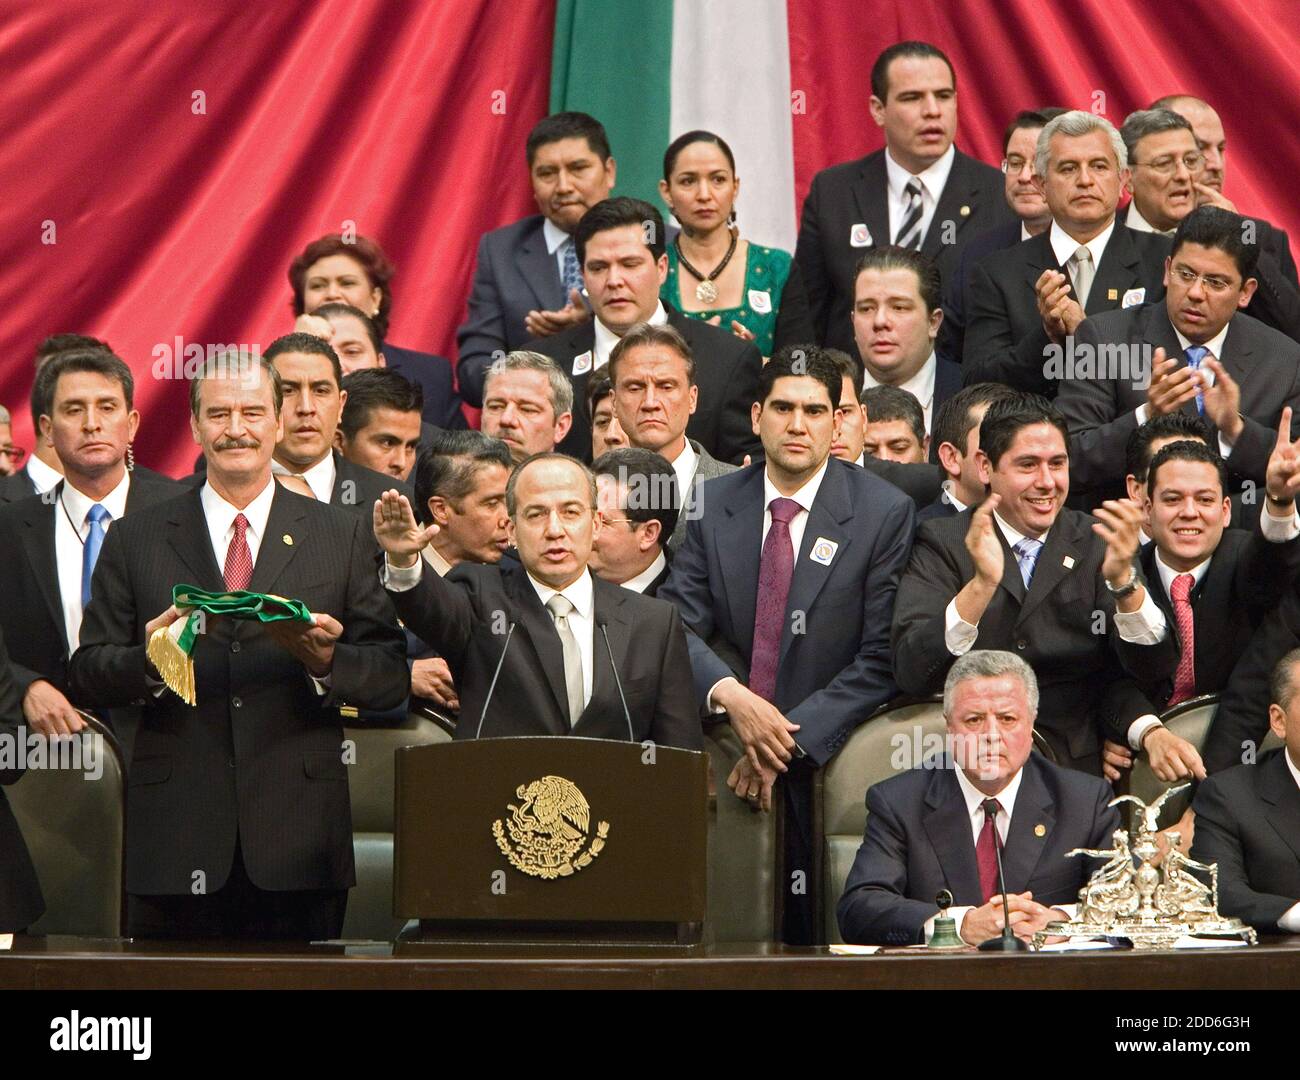 NO FILM, NO VIDEO, NO TV, NO DOCUMENTARY - Mexican Congress looking on Felipe Calderon speaking during his inauguration ceremony at the Mexican Congress in Mexico City, Mexico on December 1st, 2006. National Action Party (PAN) deputies took the podium three days ago in order to assure the swearing-in ceremony. Photo by Heriberto Rodriguez/MCT/ABACAPRESS.COM Stock Photo